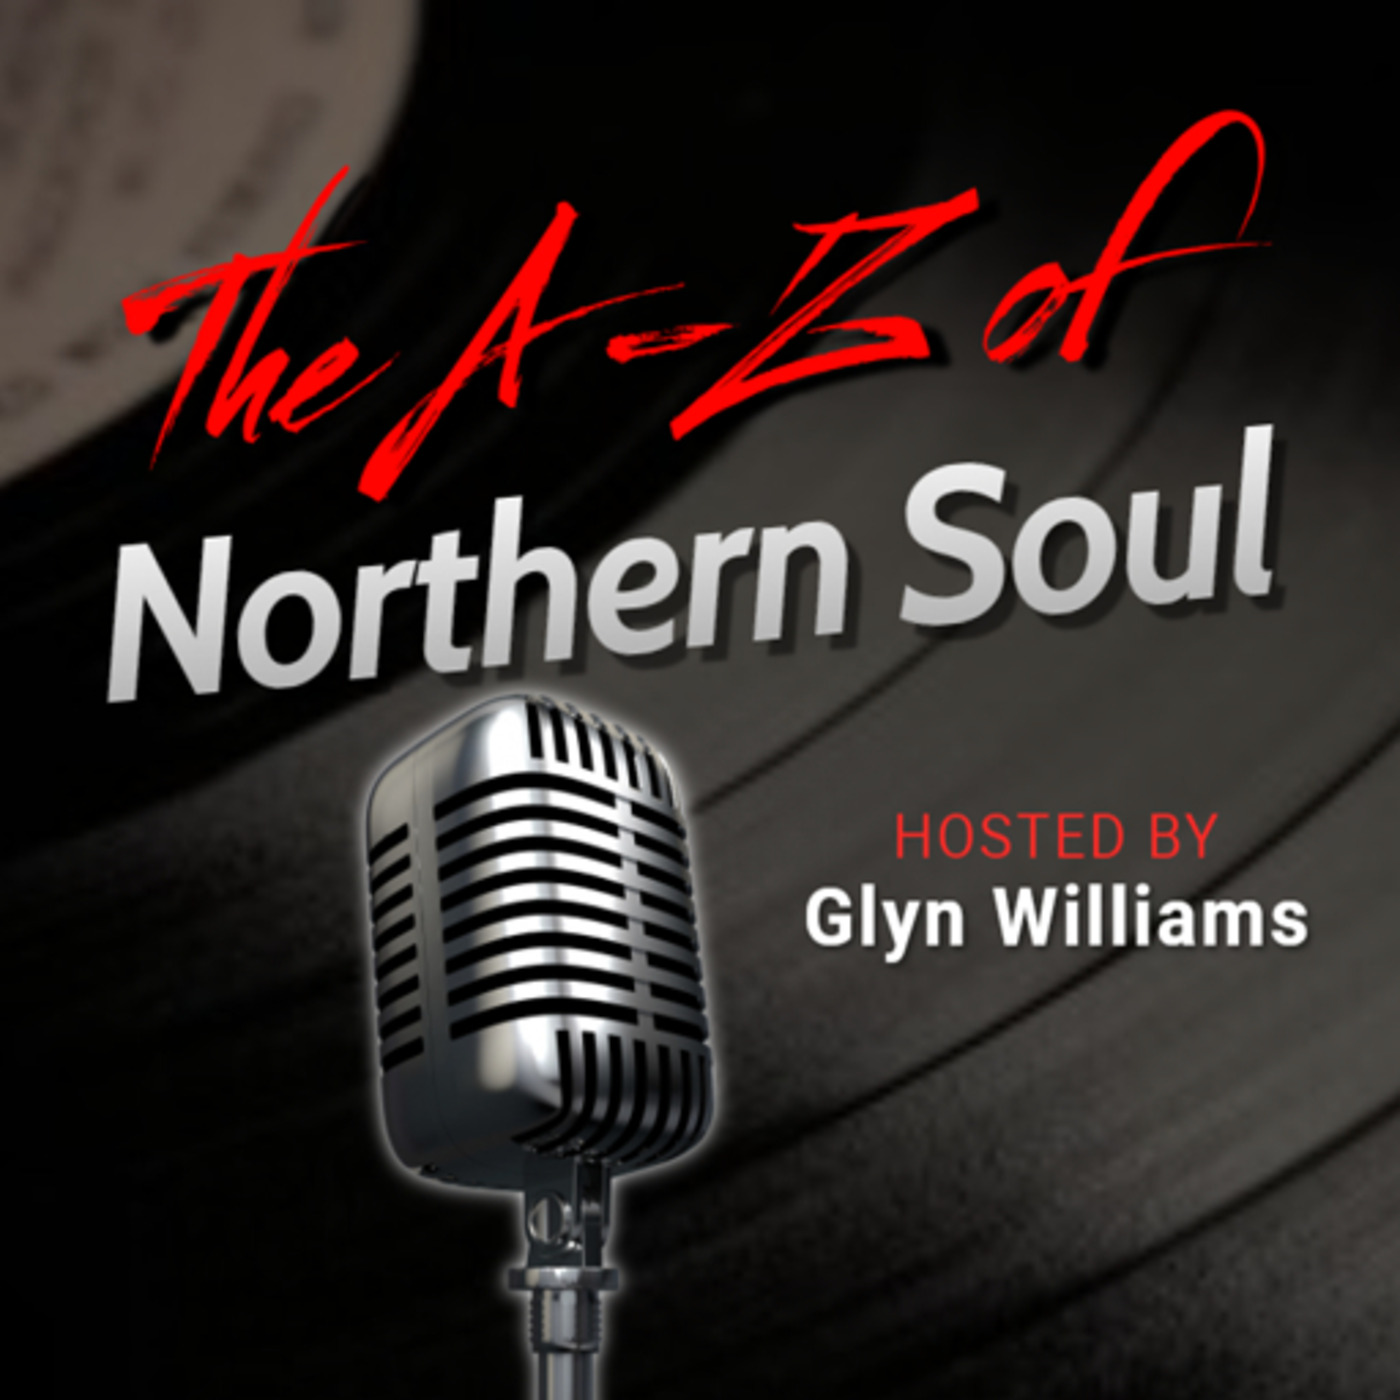 The A-Z of Northern Soul E015